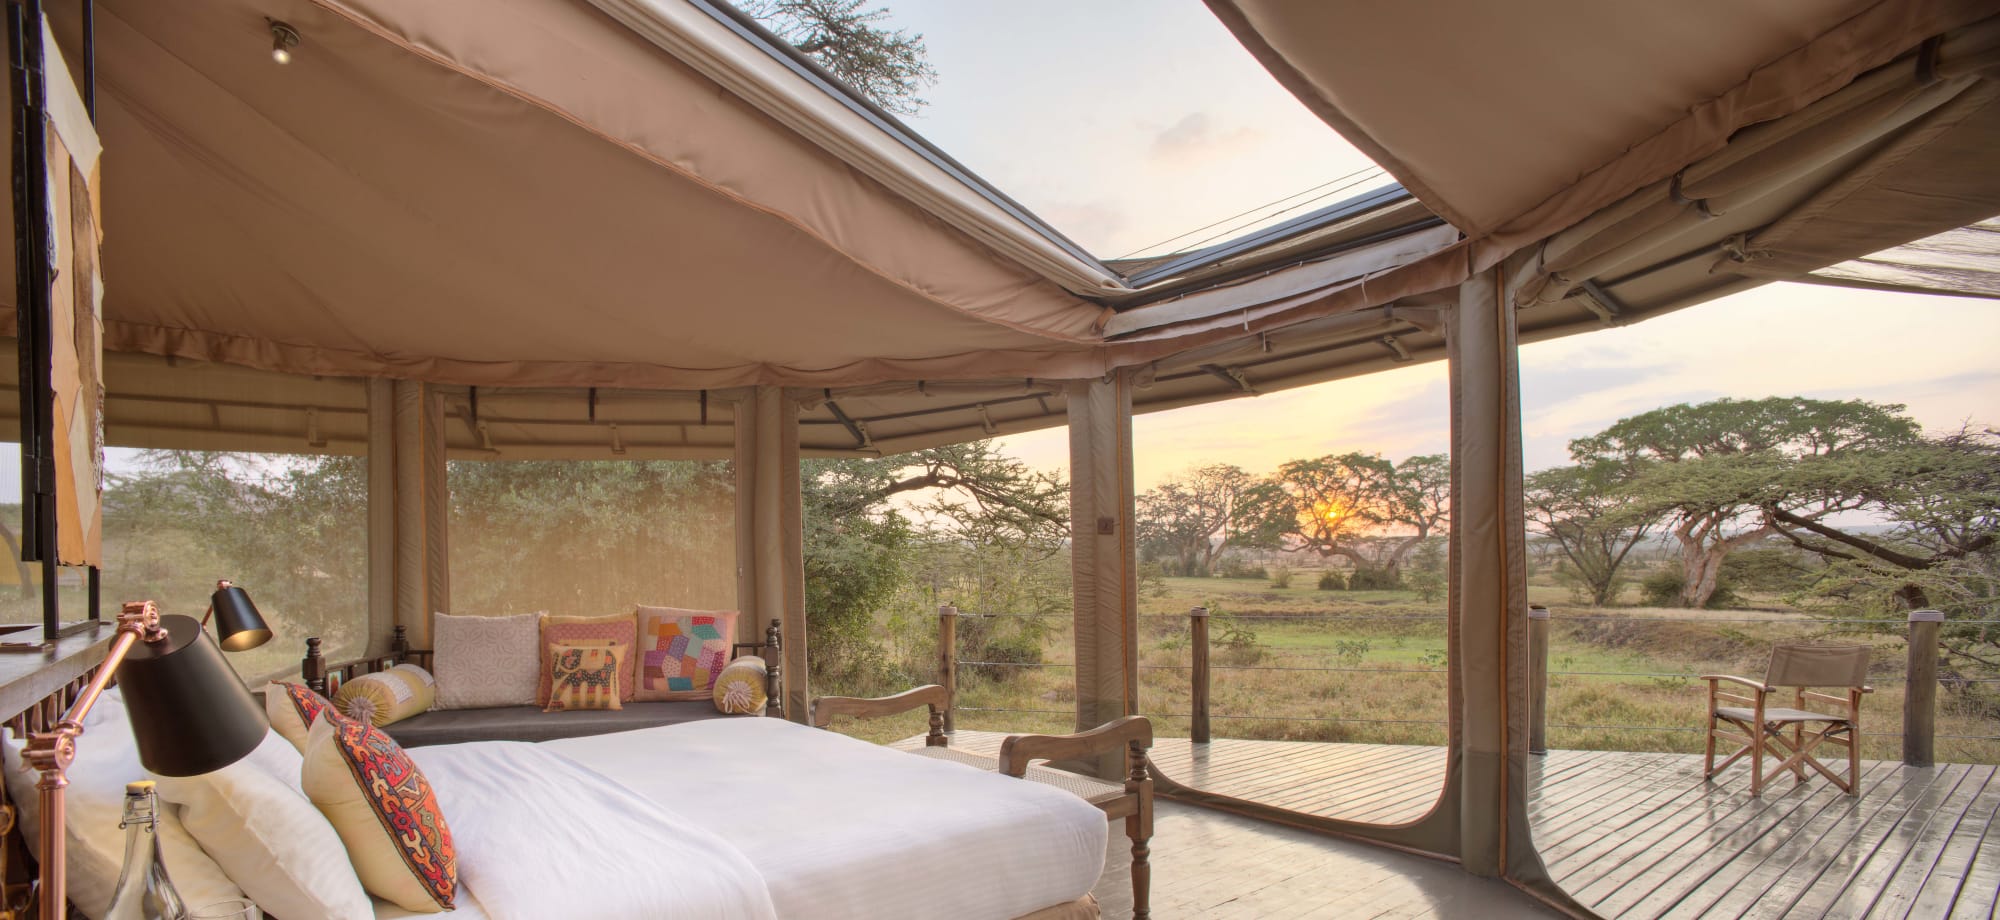 Leopard_hill_kenya_view_from_tent-1